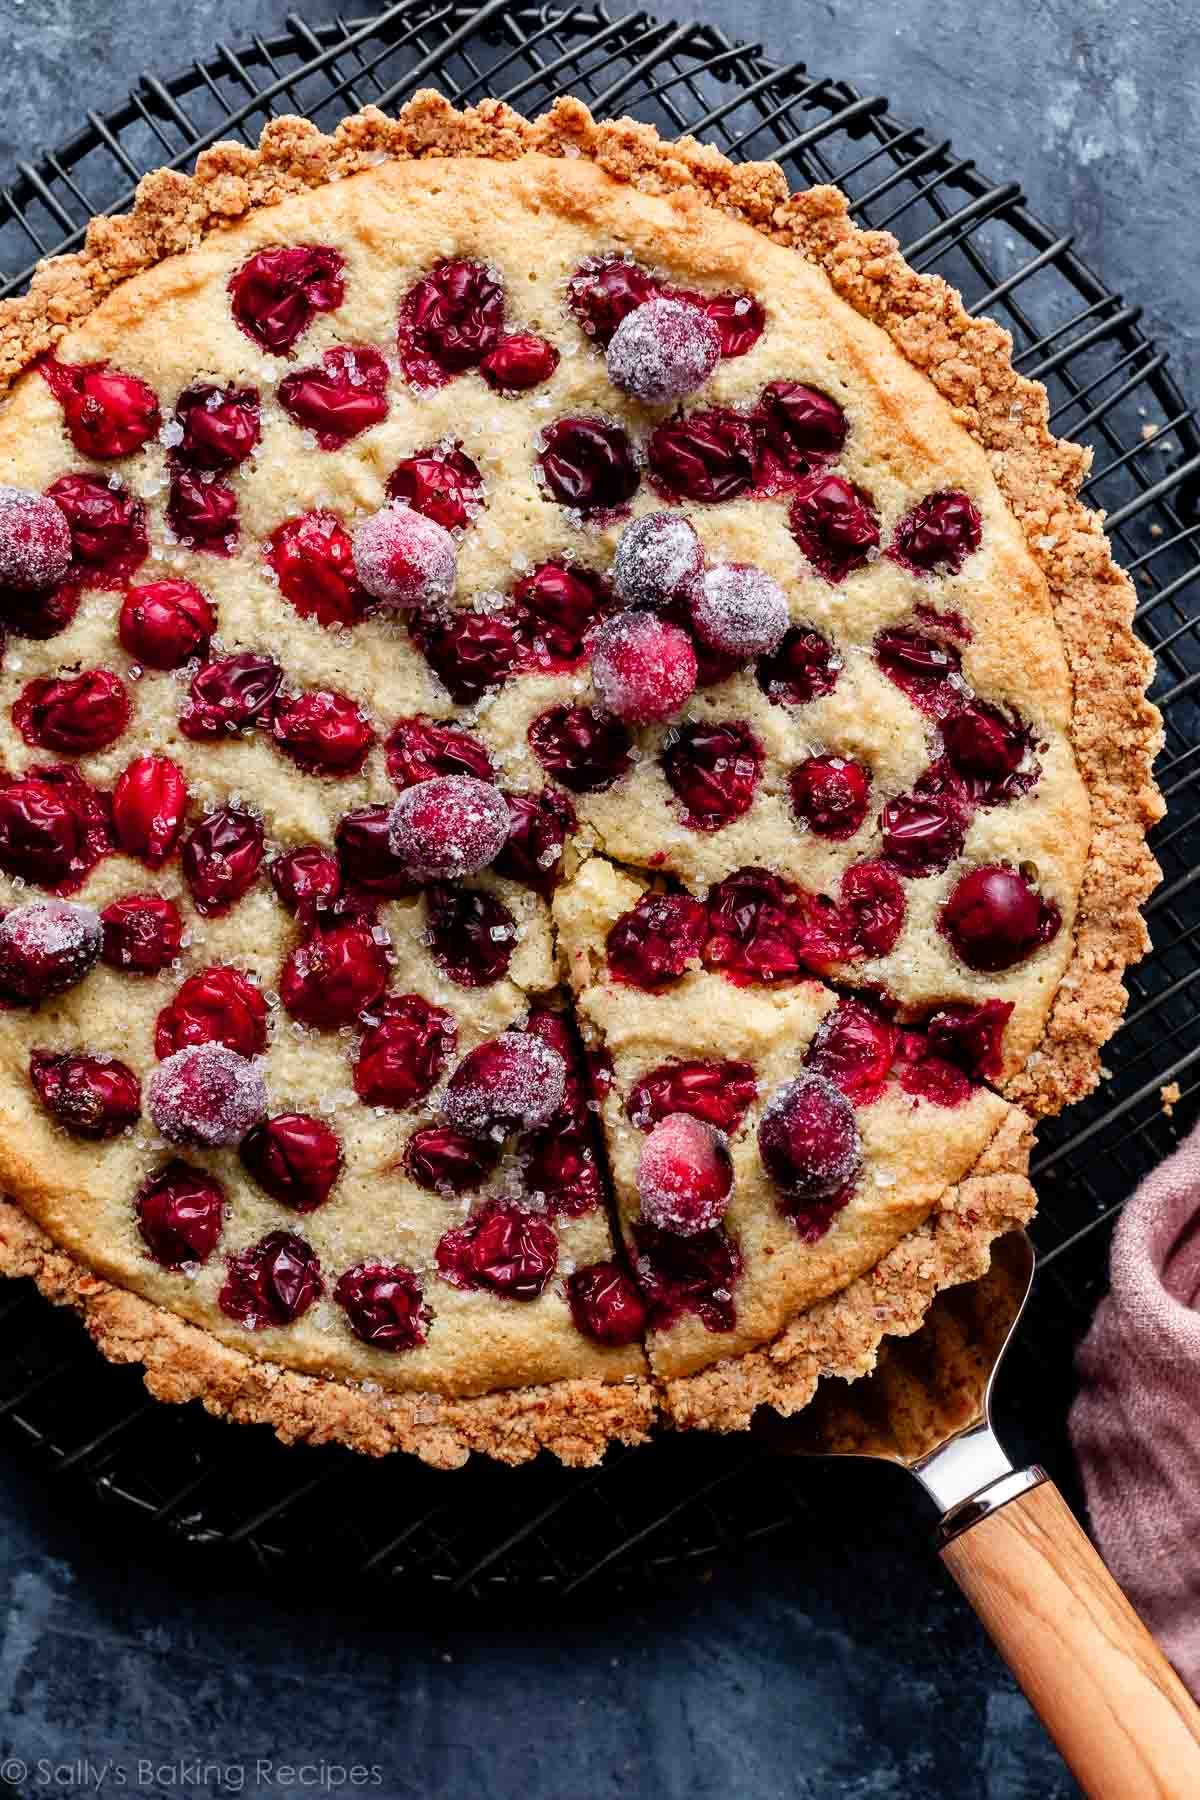 cranberry frangipane tart with sugared cranberries on top.